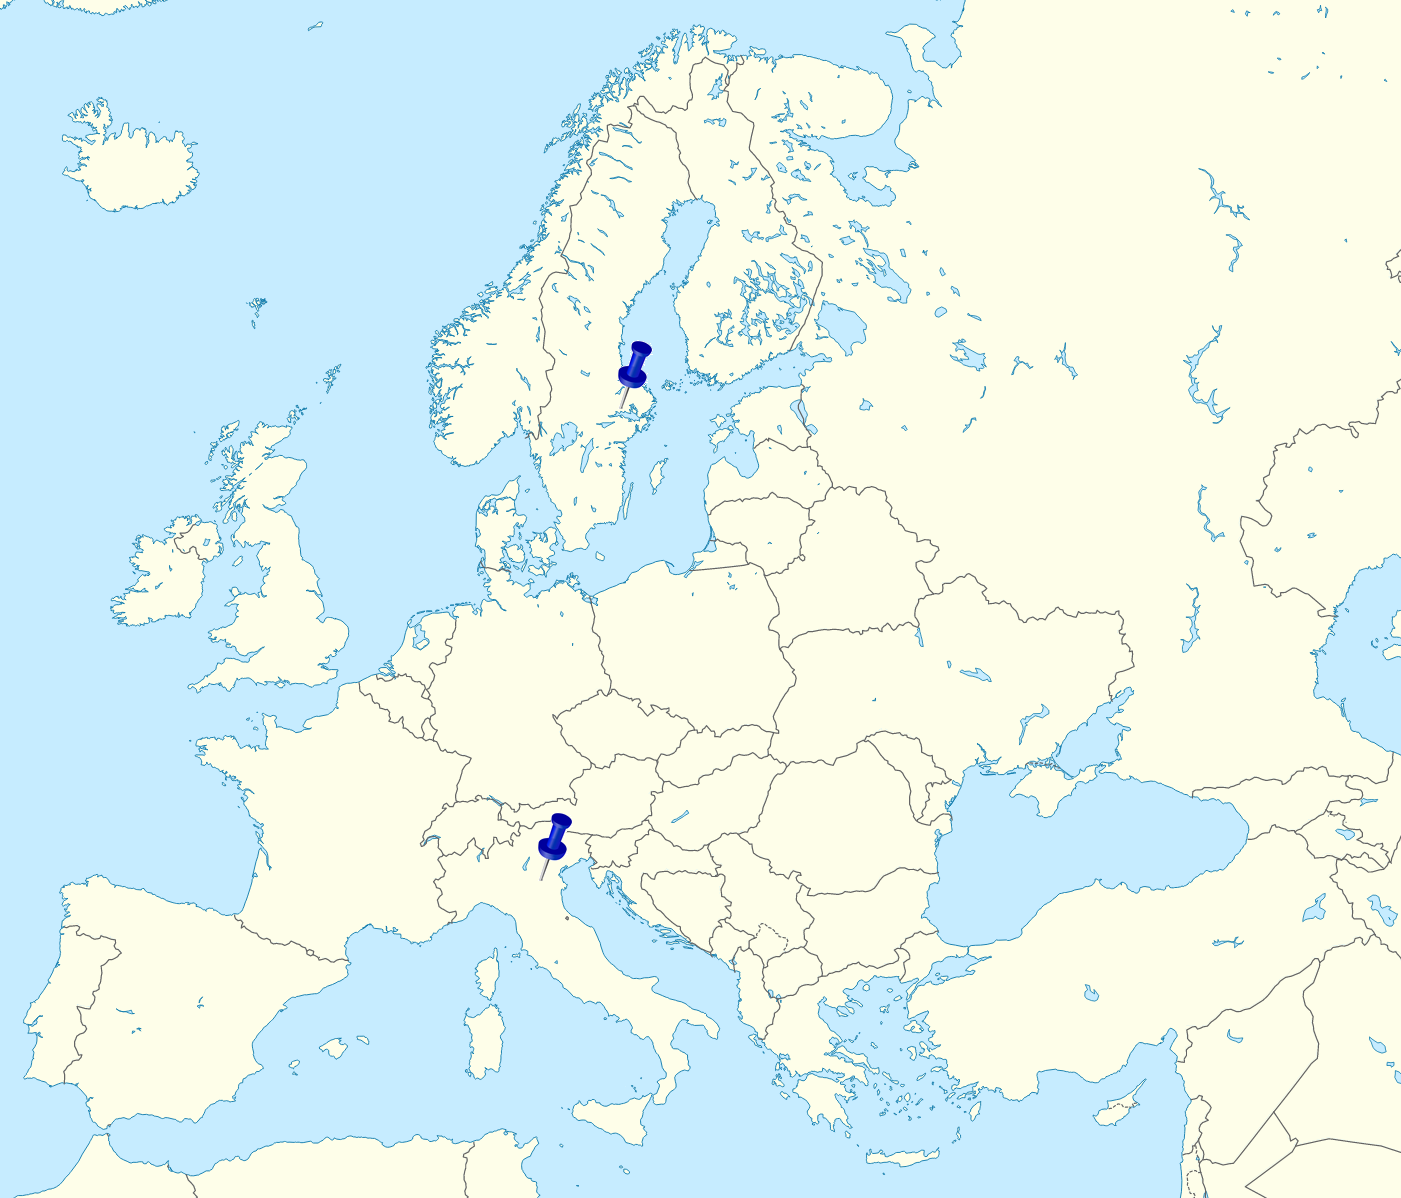 Map over Europe with indication in Italy and Sweden